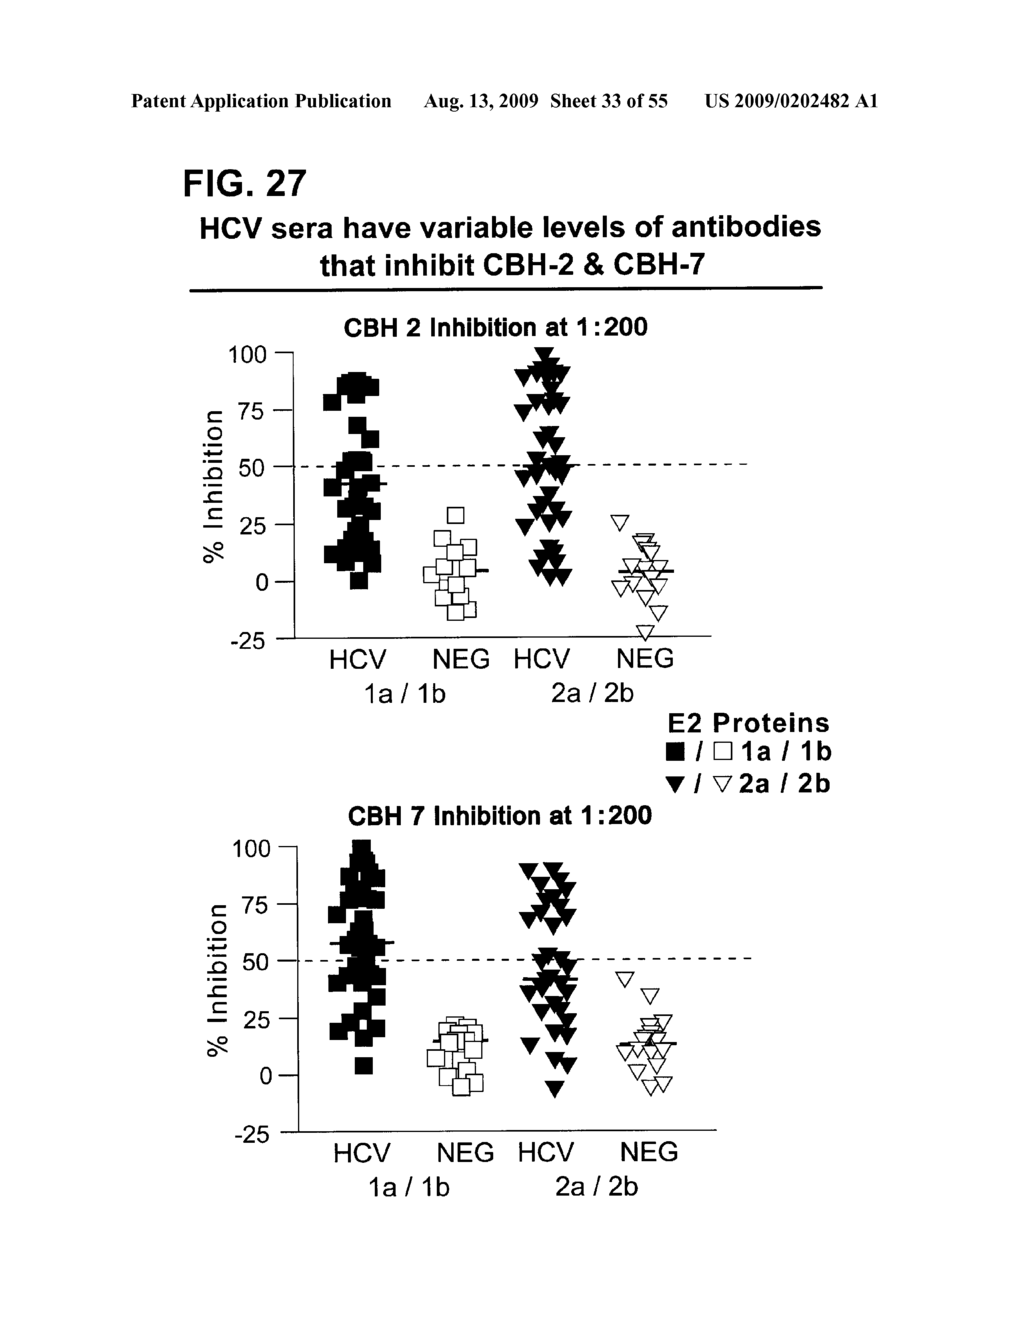 Prevention and Treatment of HCV Infection Employing Antibodies Directed Against Conformational and Linear Epitopes - diagram, schematic, and image 34